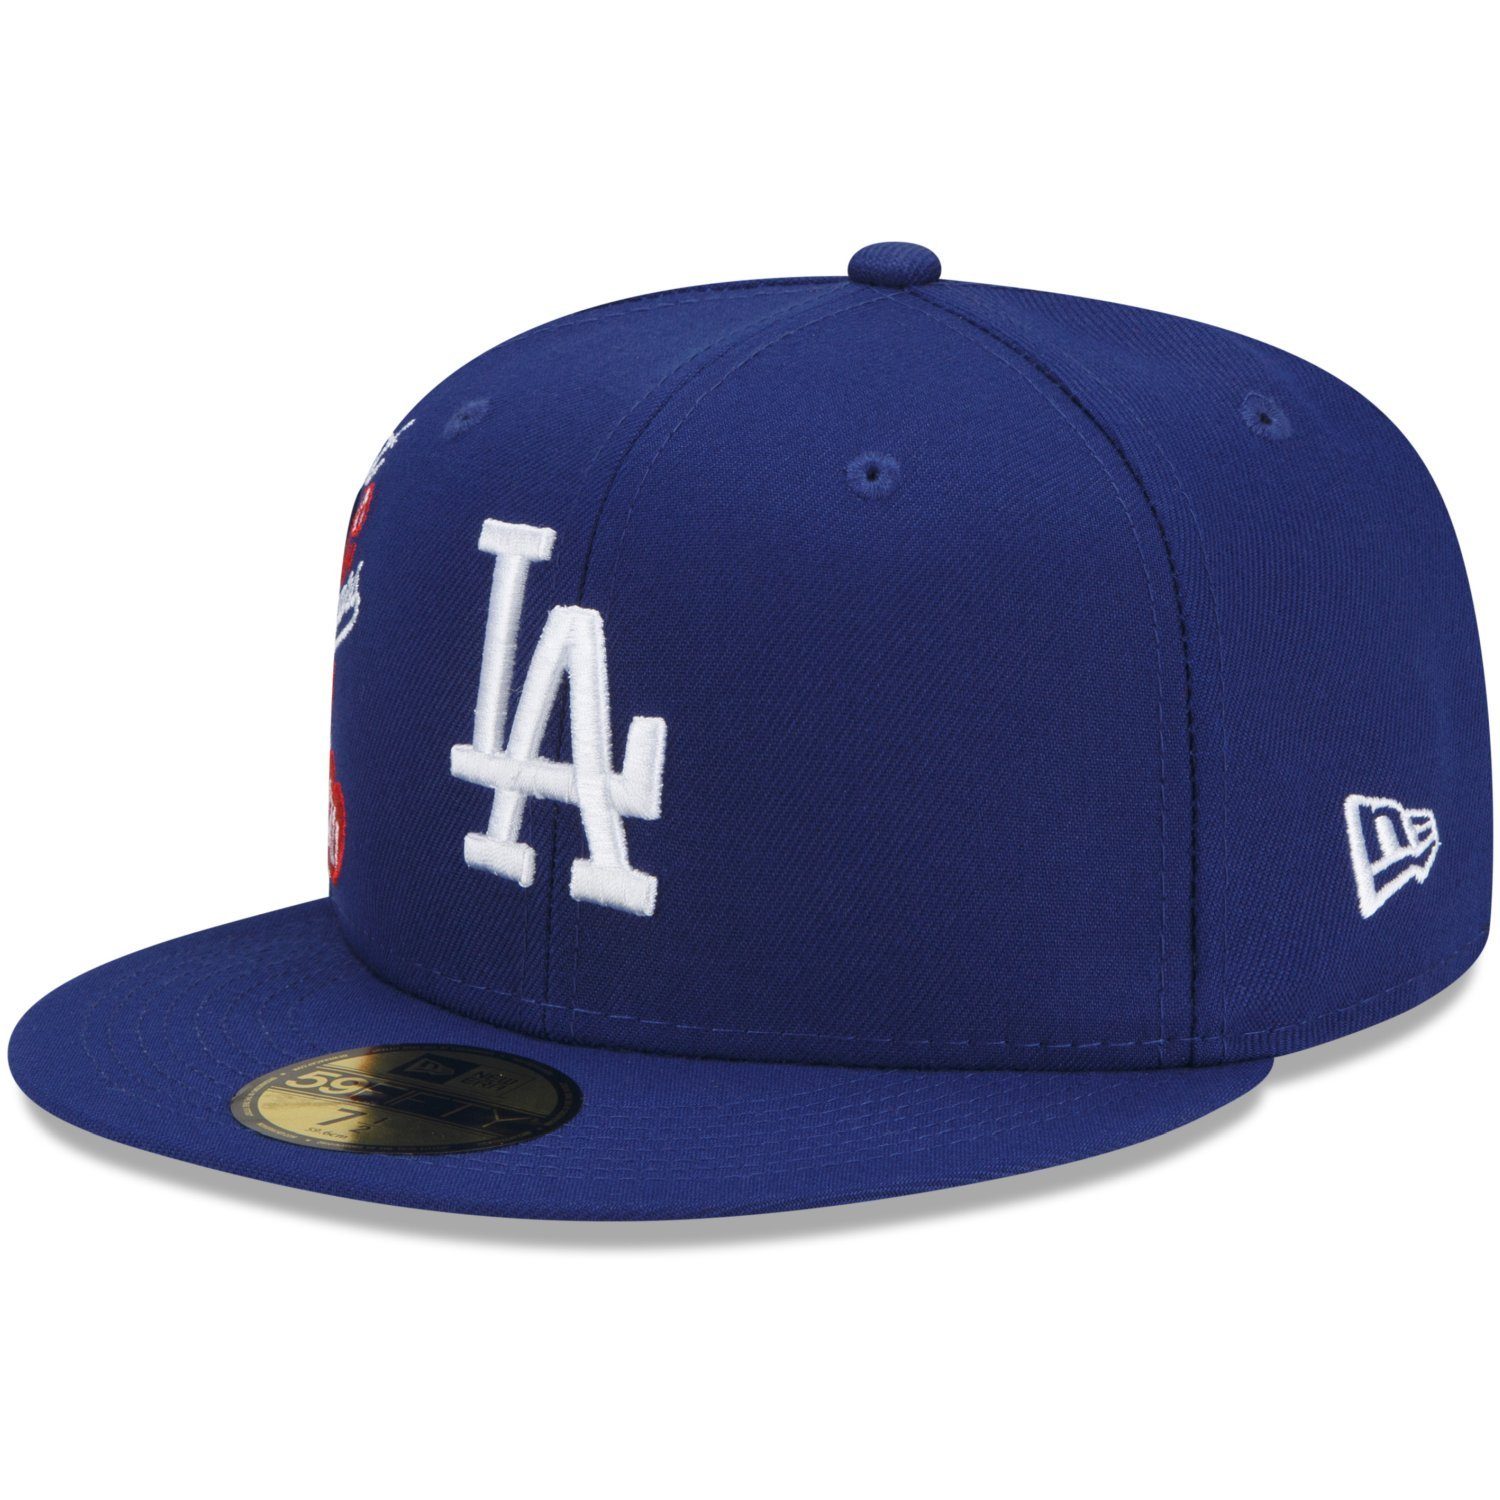 CLUSTER CITY Era Los Angeles Dodgers Cap 59Fifty Fitted New